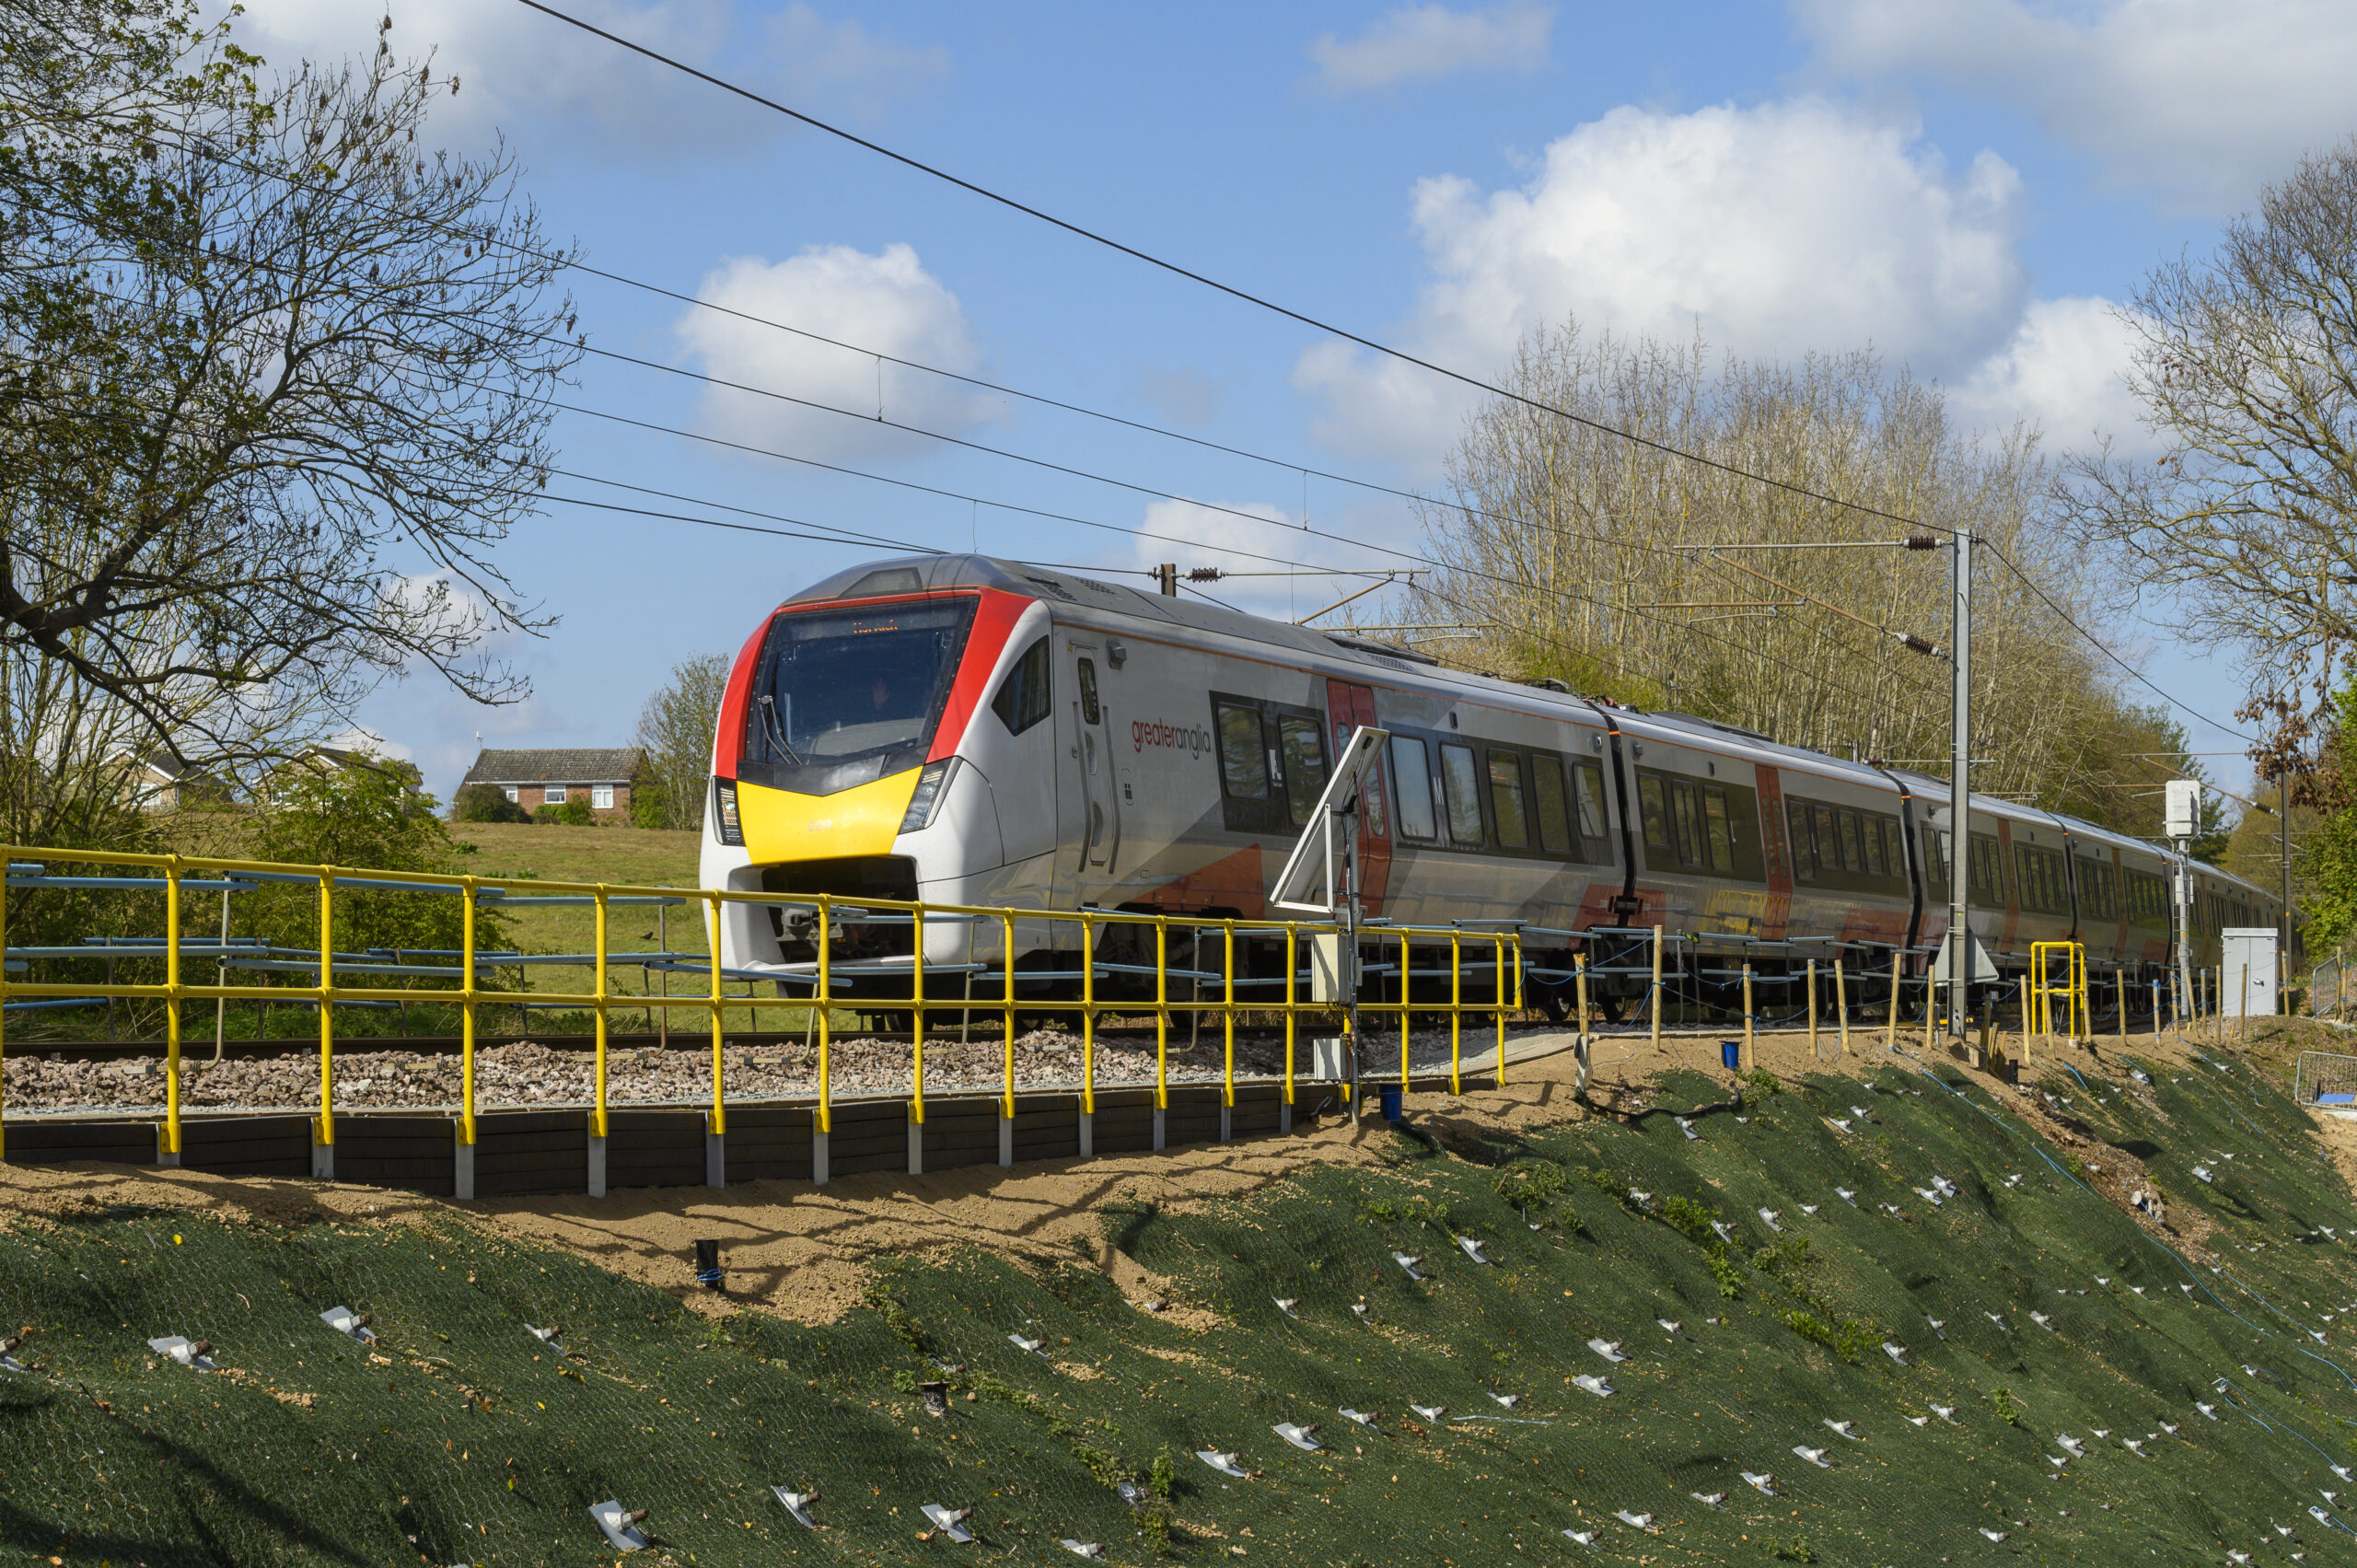 ORR approves £43.1bn plan to deliver a safe and customer focused railway